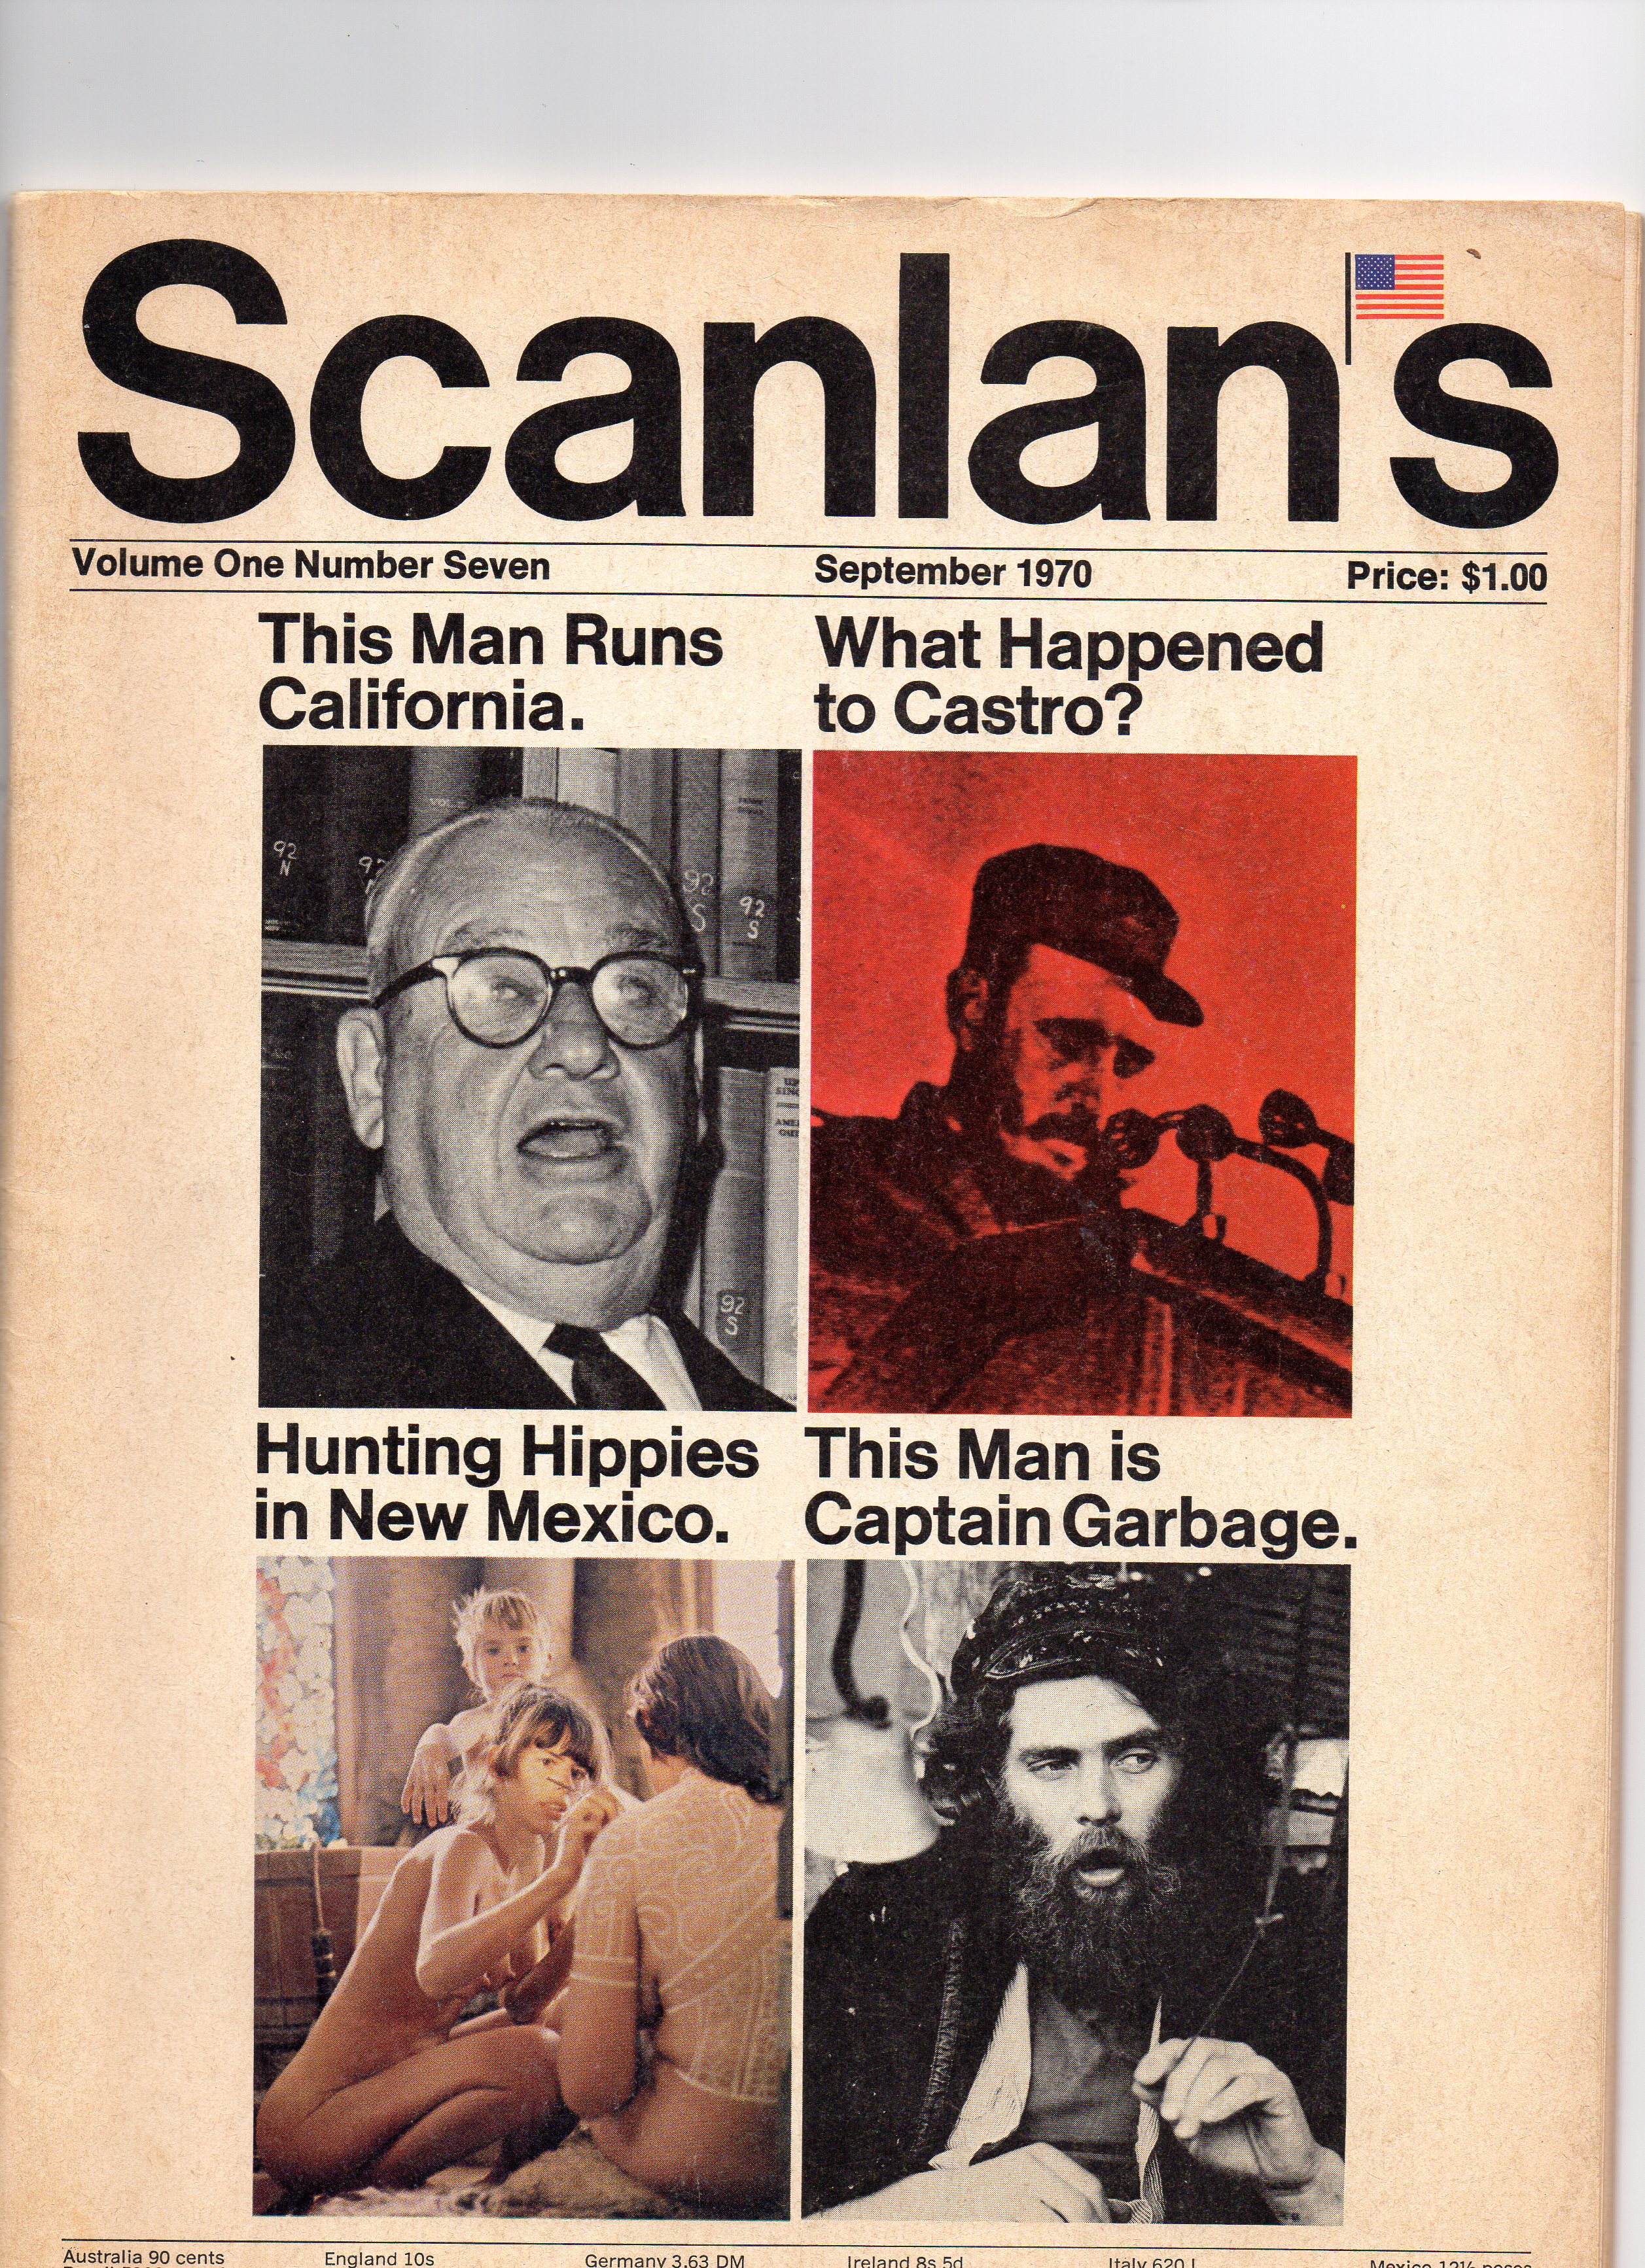 Scanlan’s Monthly 7, September 1970, from my personal collection